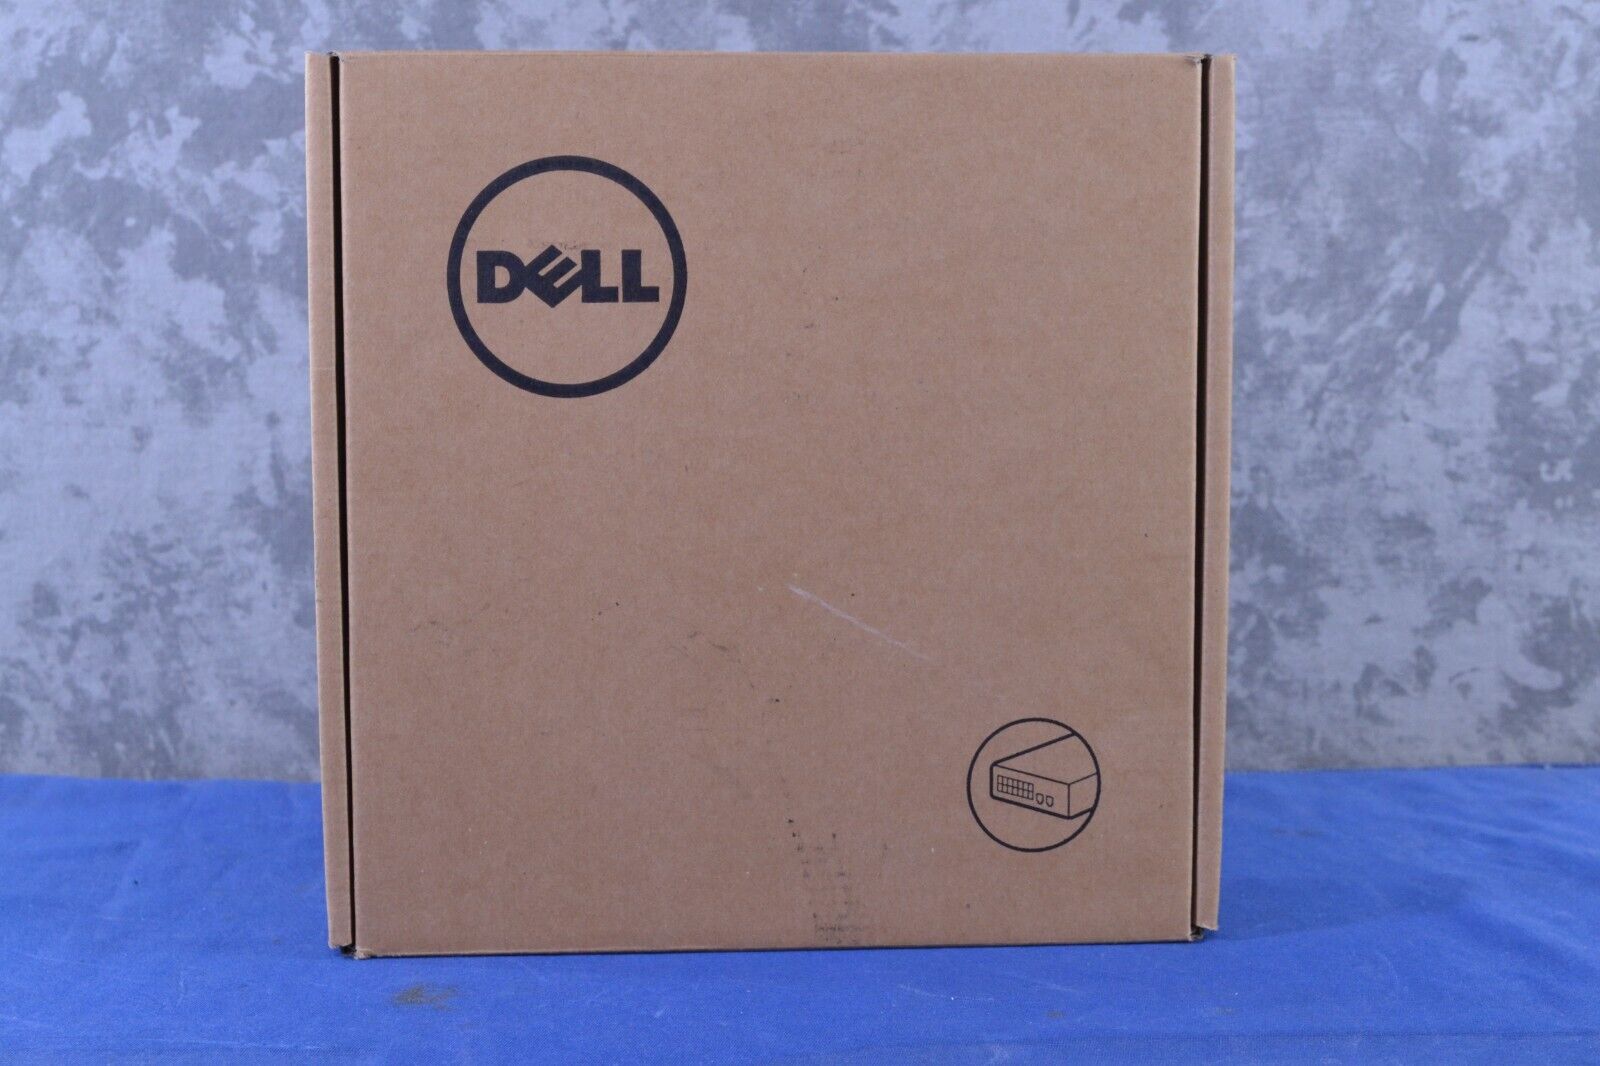 Lot of 2 x Dell SonicWALL 01SSC0217 Firewall Soho Security Appliance (C071807)